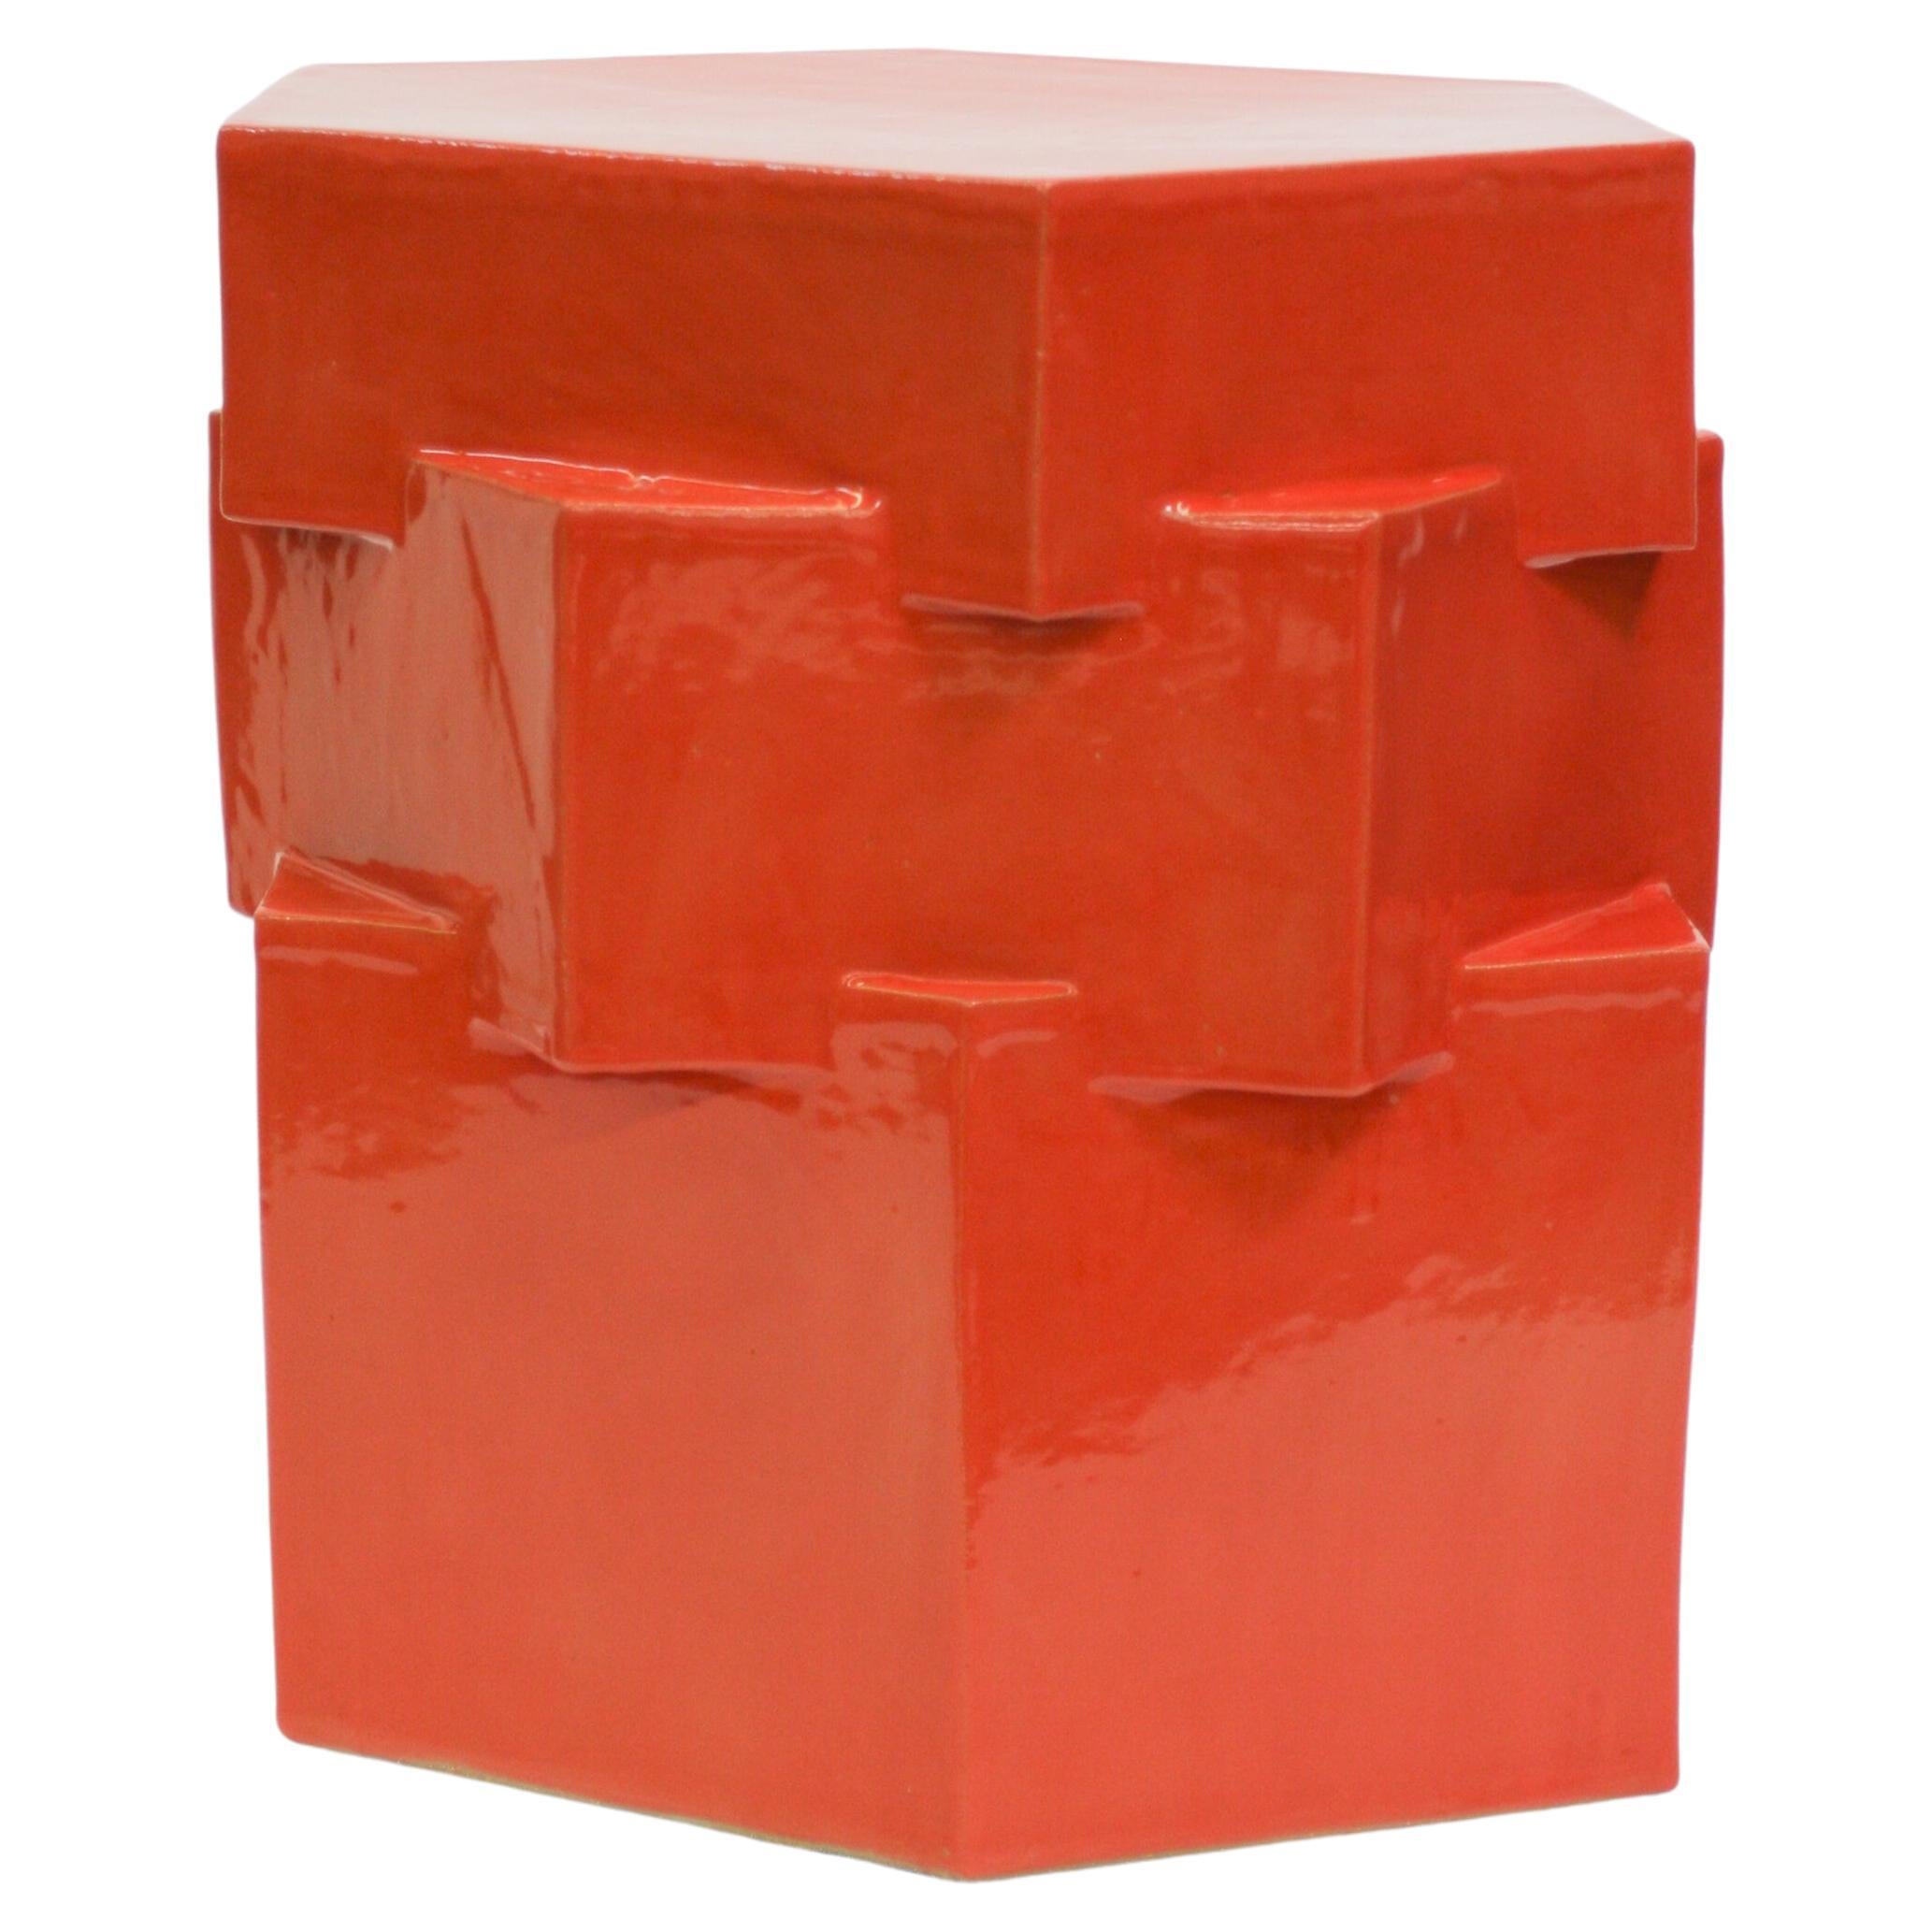 Triple Tier Ceramic Hex Side Table in Gloss Red by BZIPPY